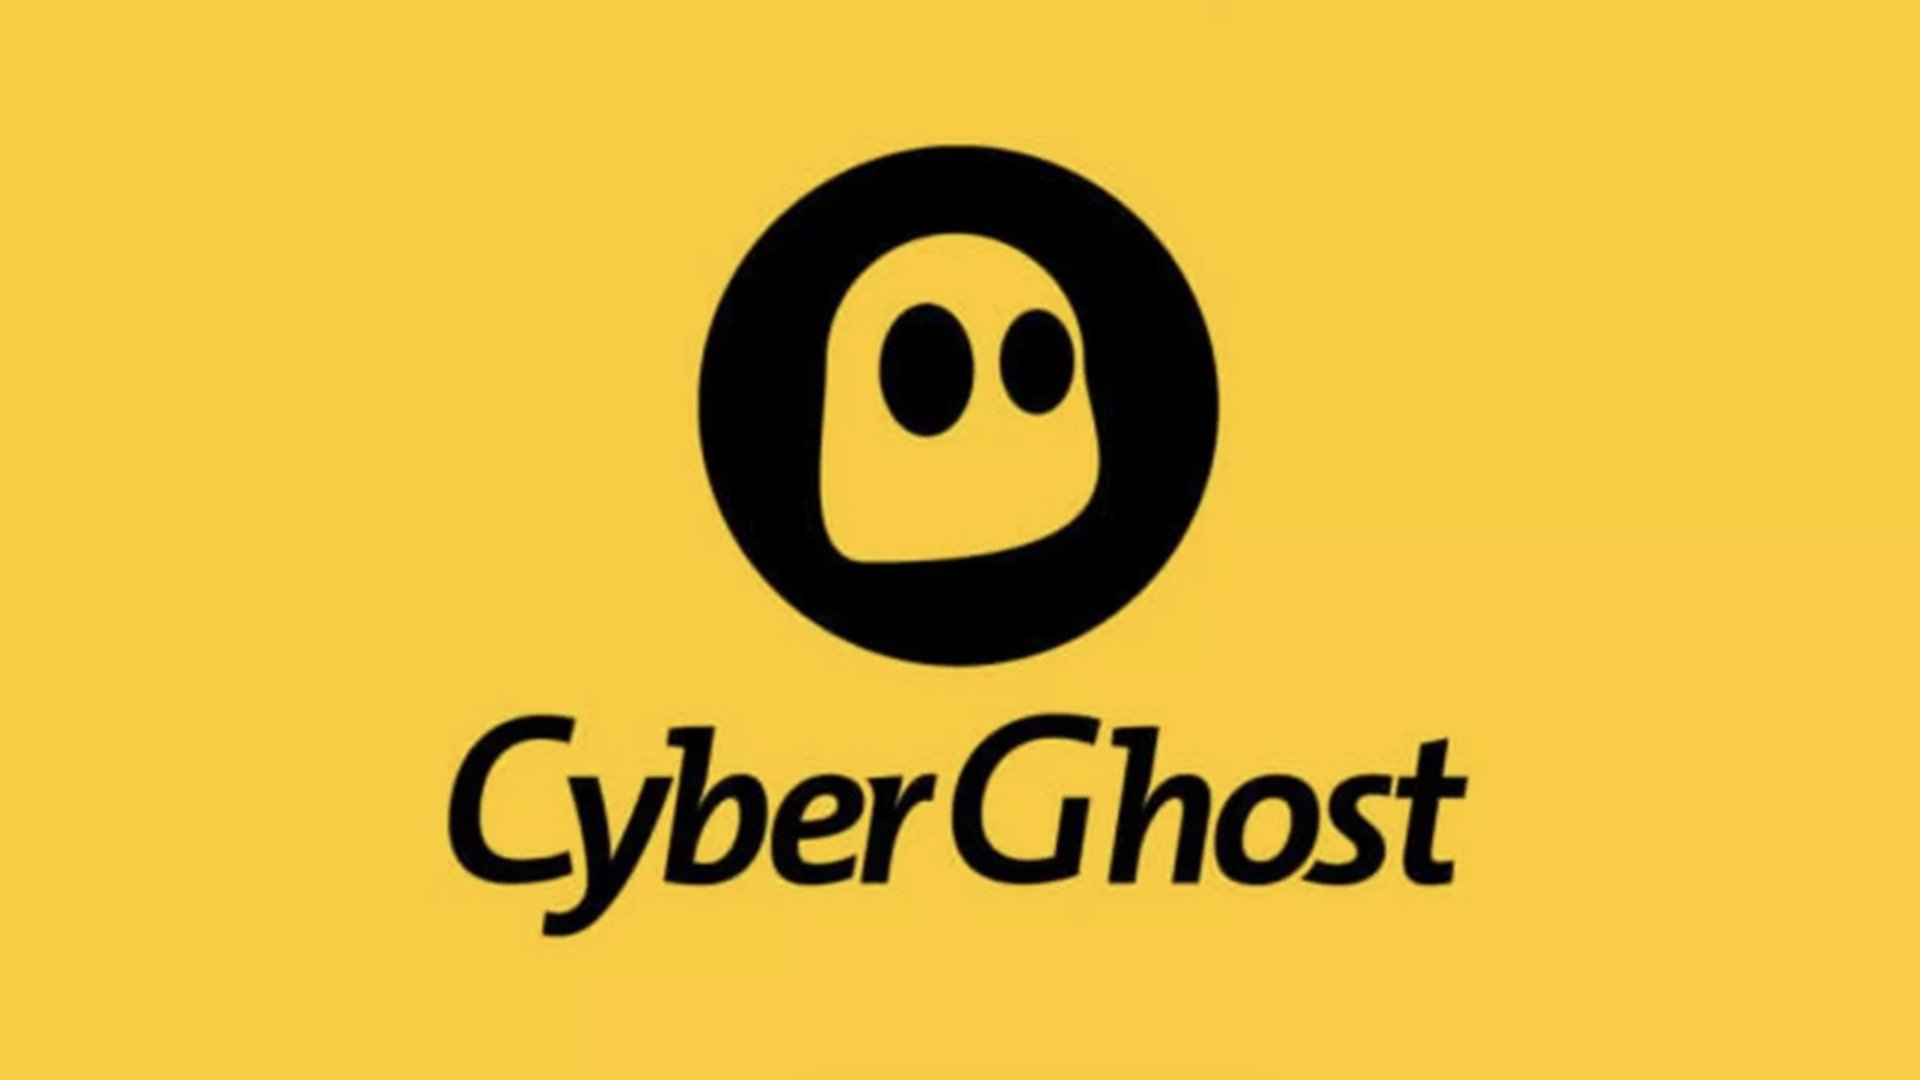 Best VPN for streaming - CyberGhost. It's logo is on a yellow background.